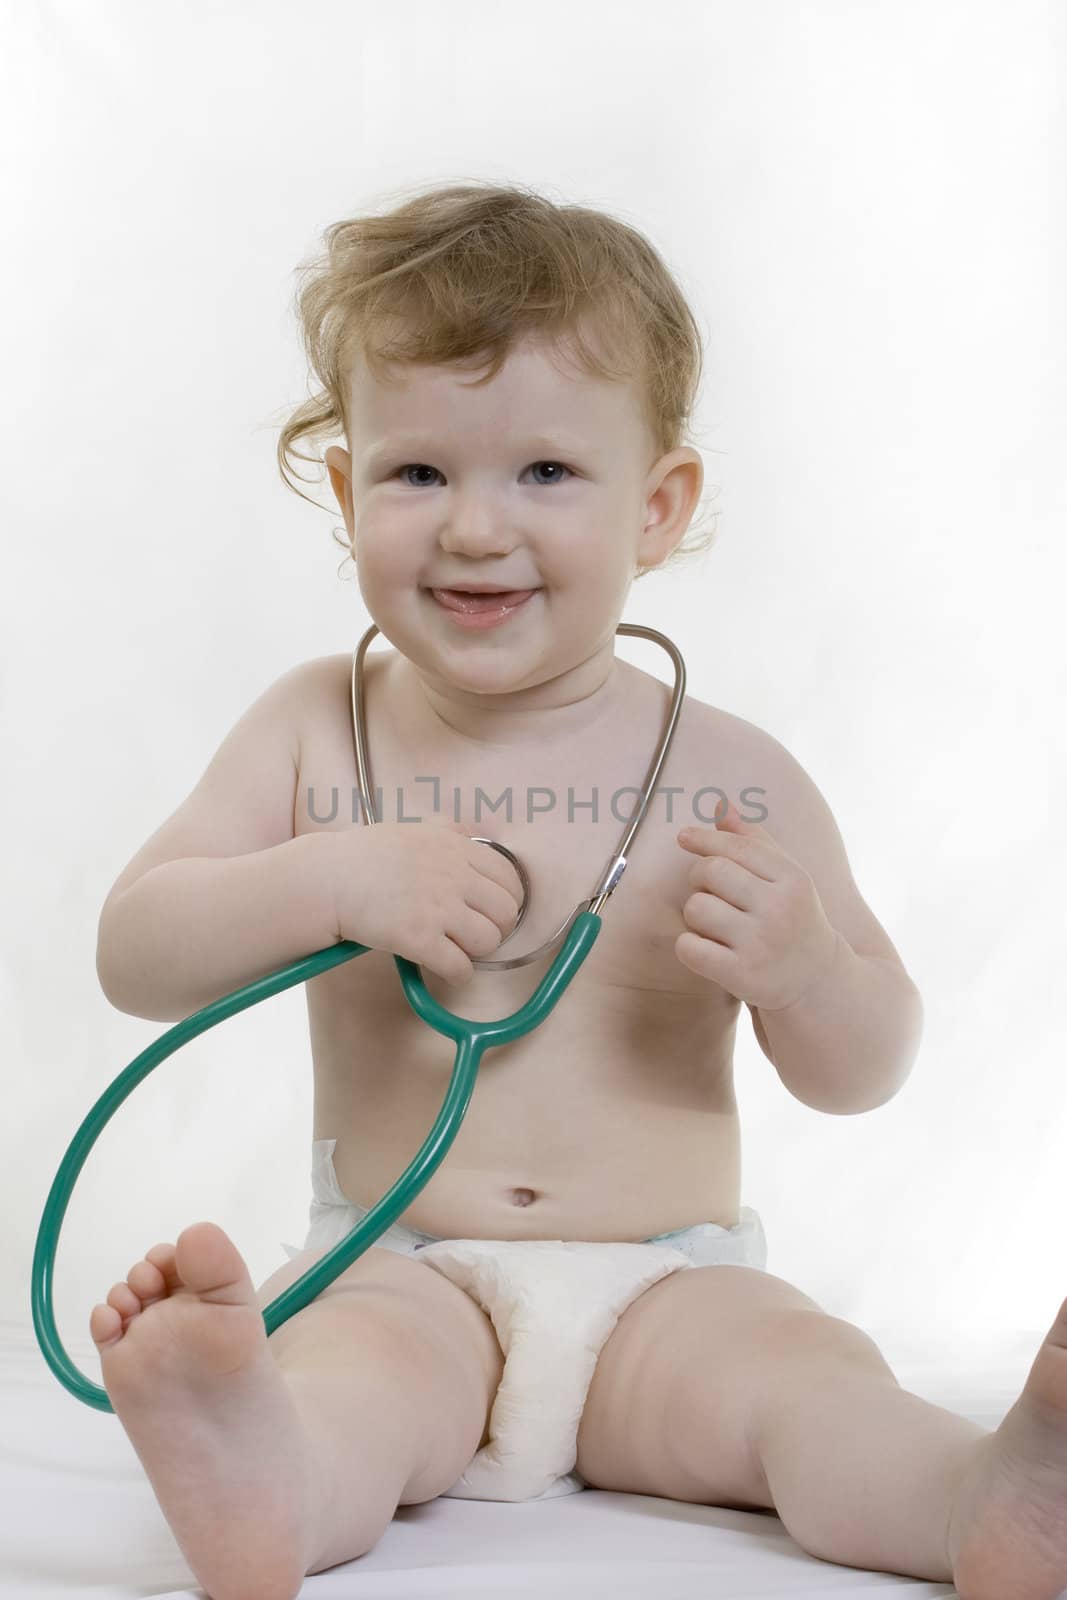 Child with a green stethoscope by Nobilior